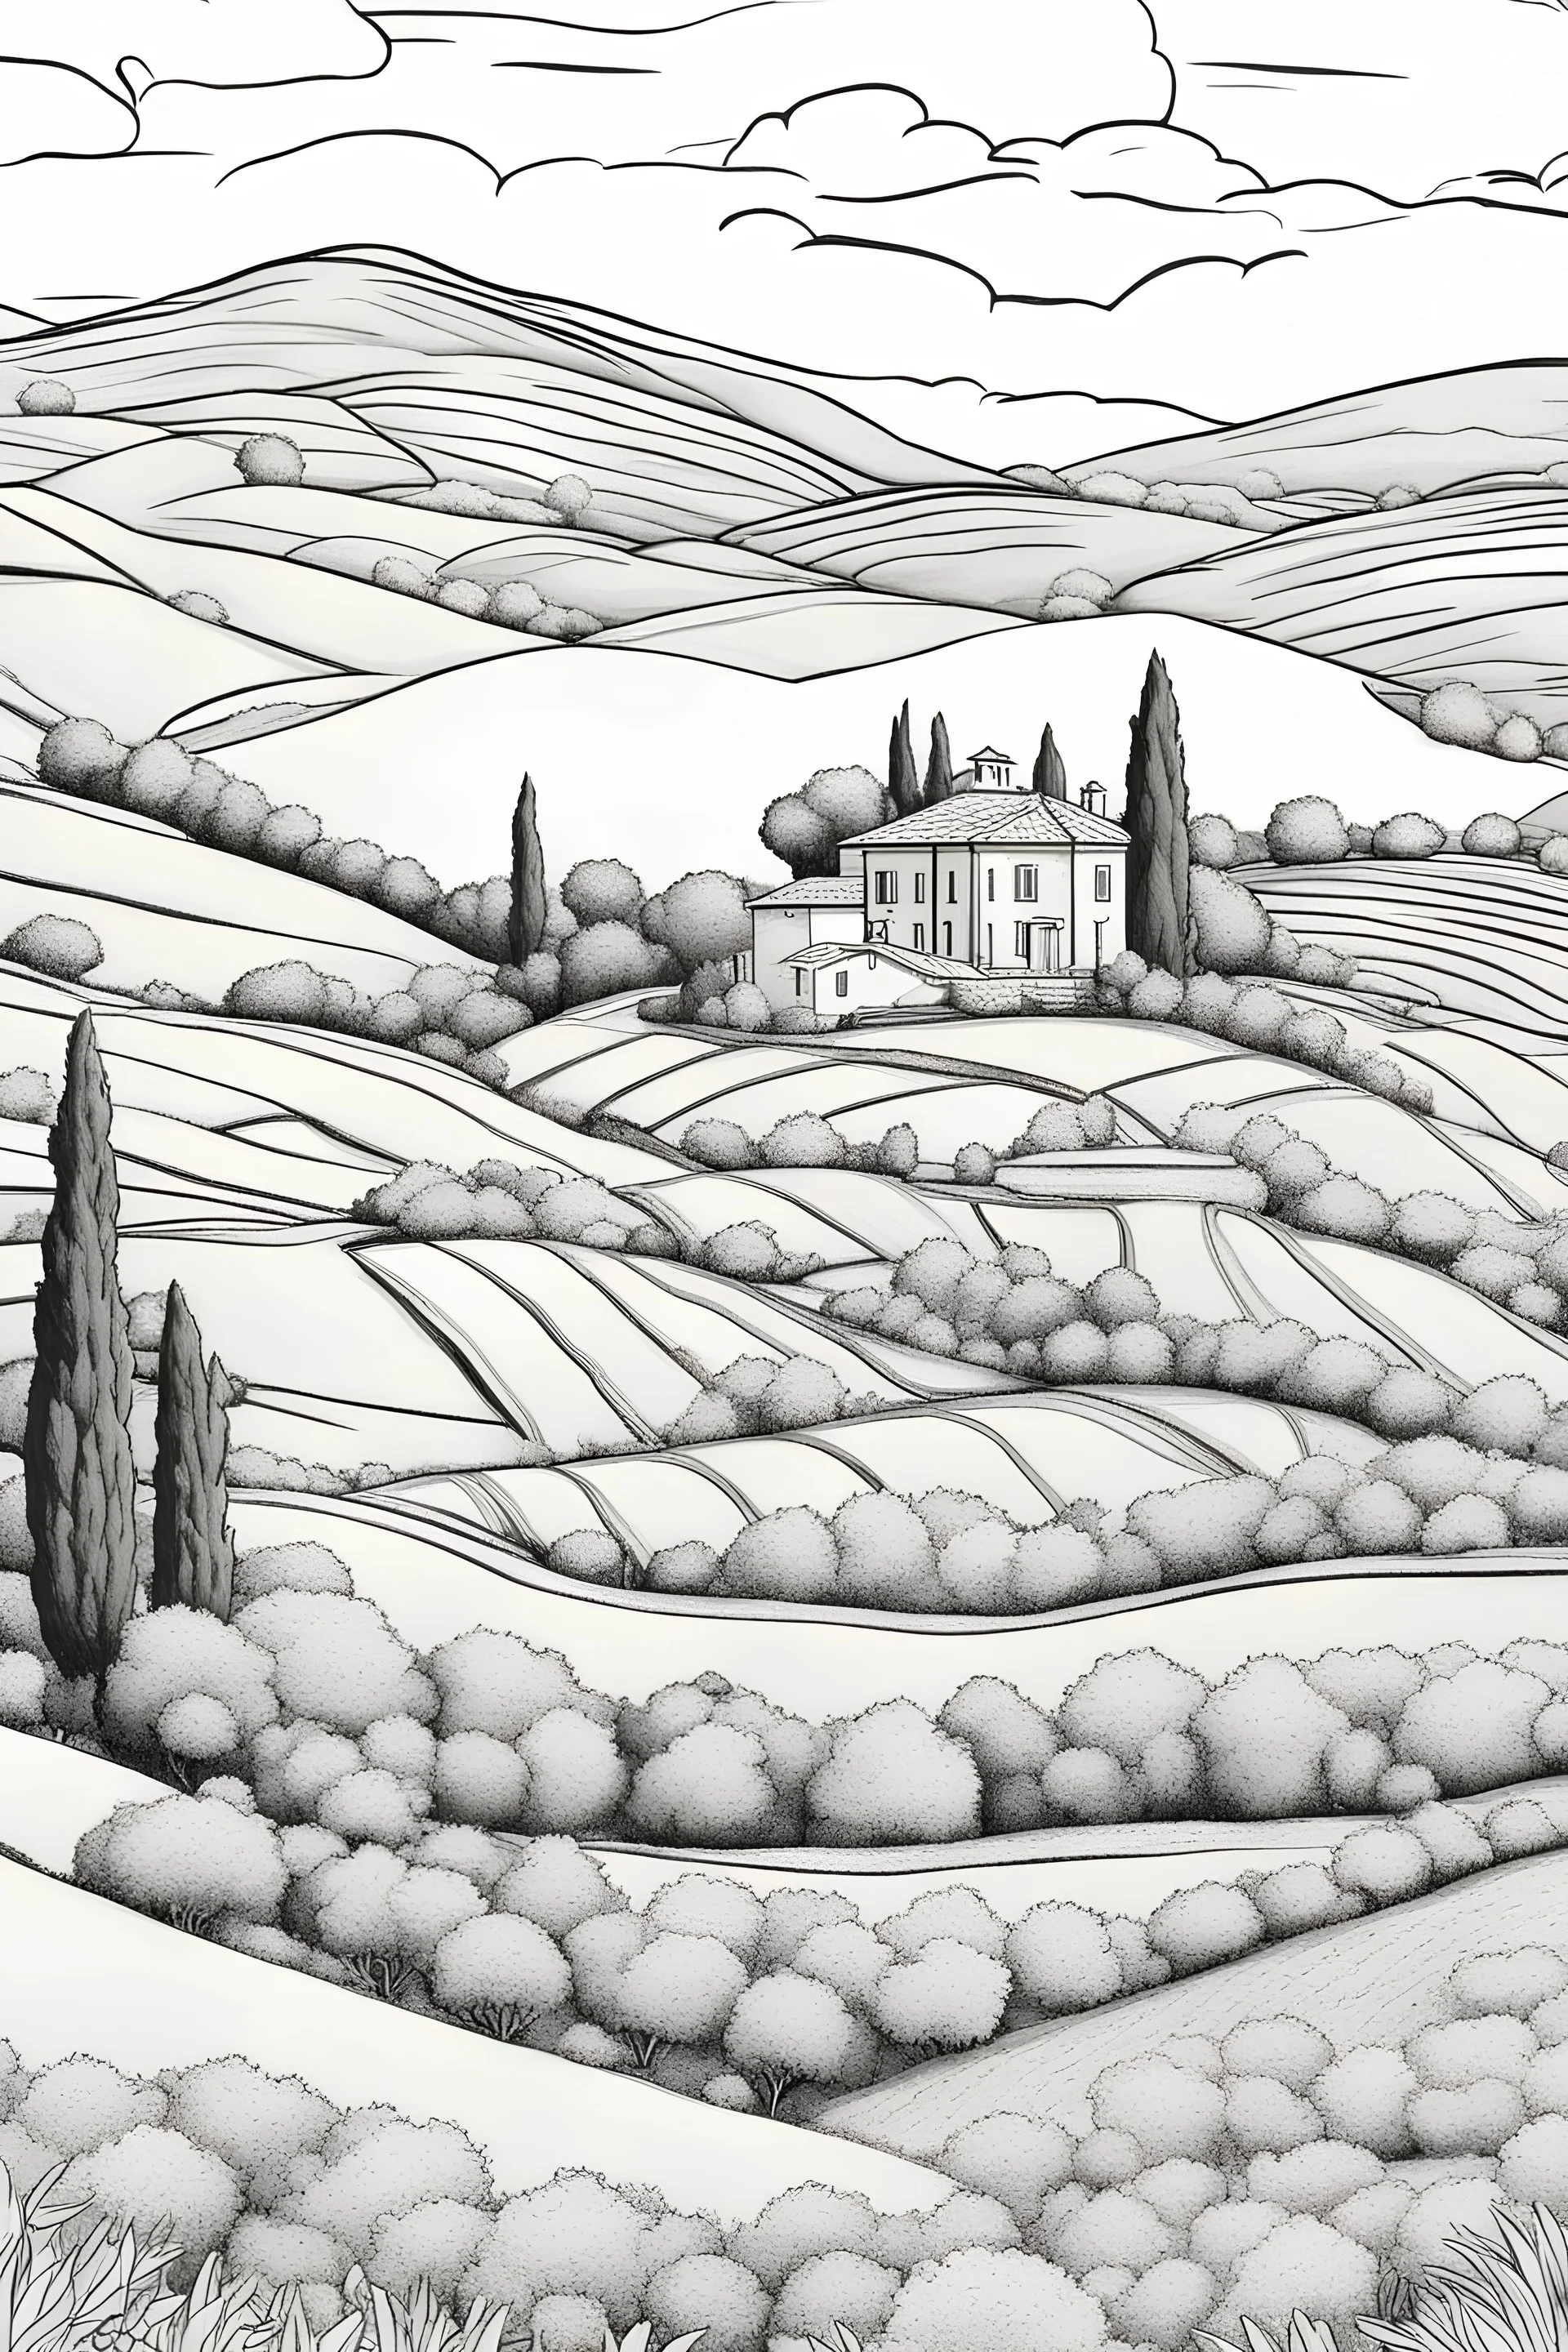 imagine prompt coloring page for adult, a hills, Tuscan villa on rolling hills, surrounded by green cypress trees and blooming fields. Infuse the scene with sunlight, conveying a cozy and tranquil atmosphere. a white background 9:11